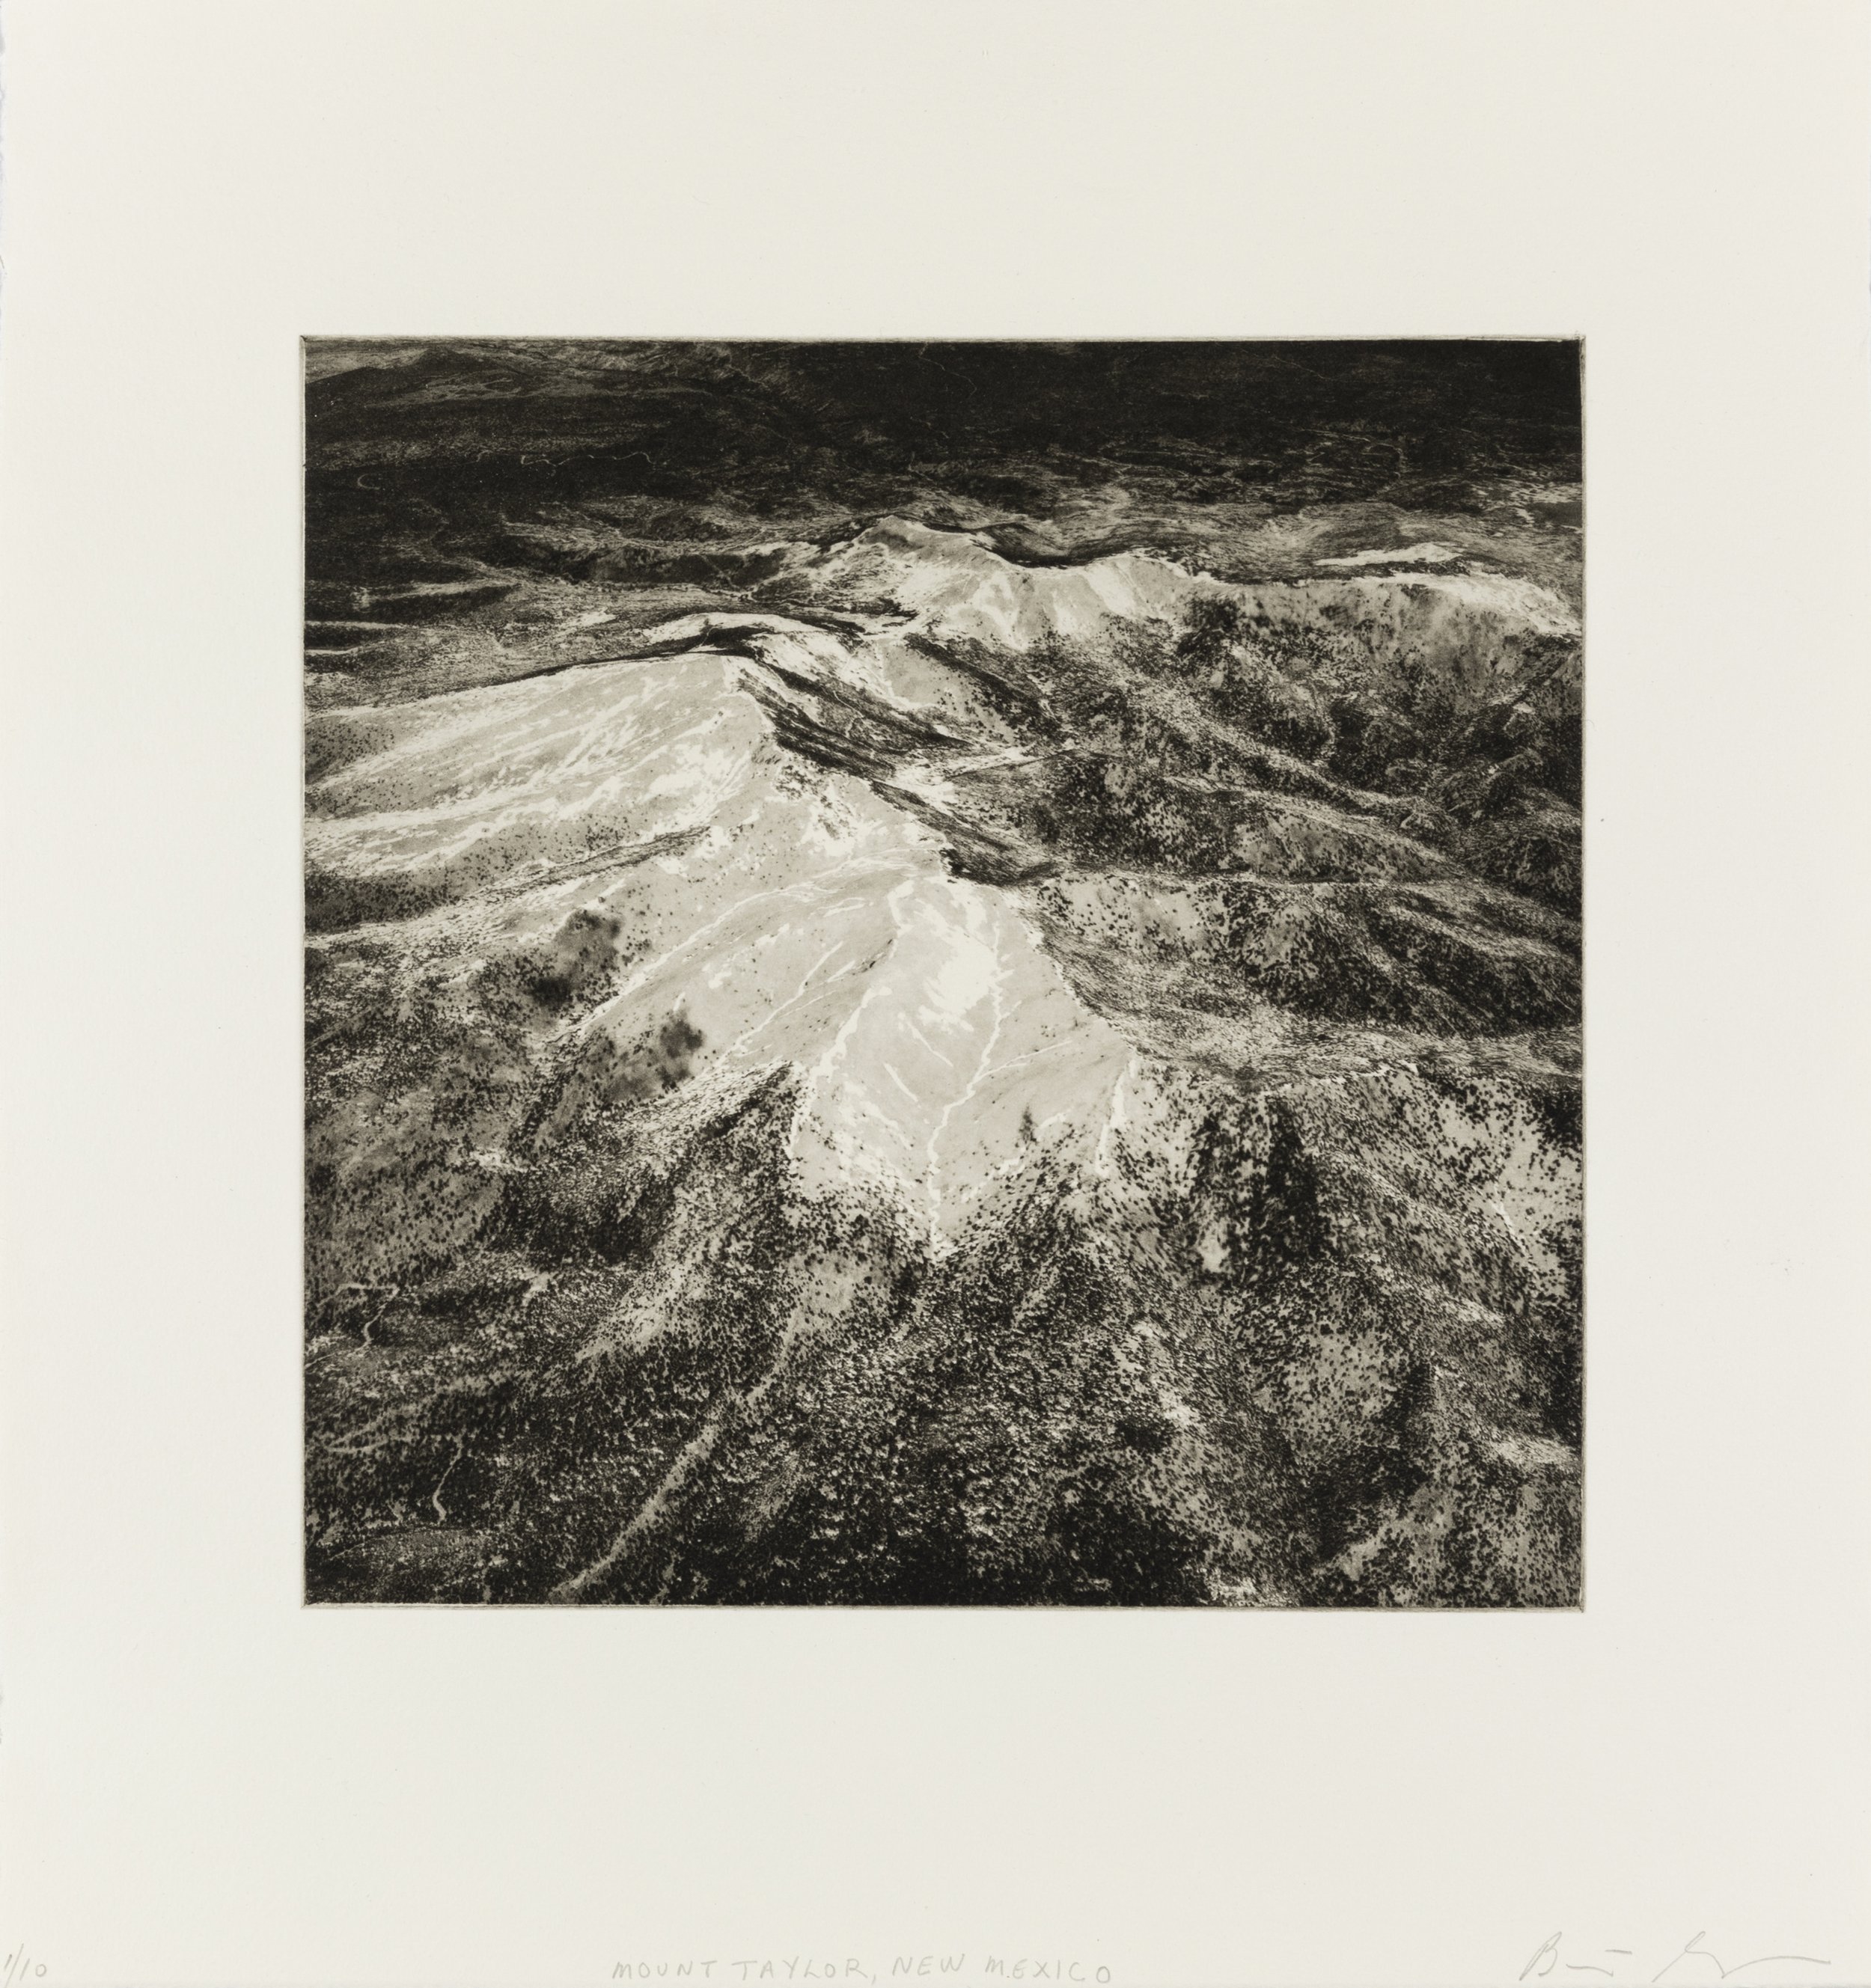    Mount Taylor, New Mexico, 2021   Copperplate photogravure etching on cotton rag paper, plate size; 10.6 x 10.6, paper size; 16 x 15.5, edition 10  